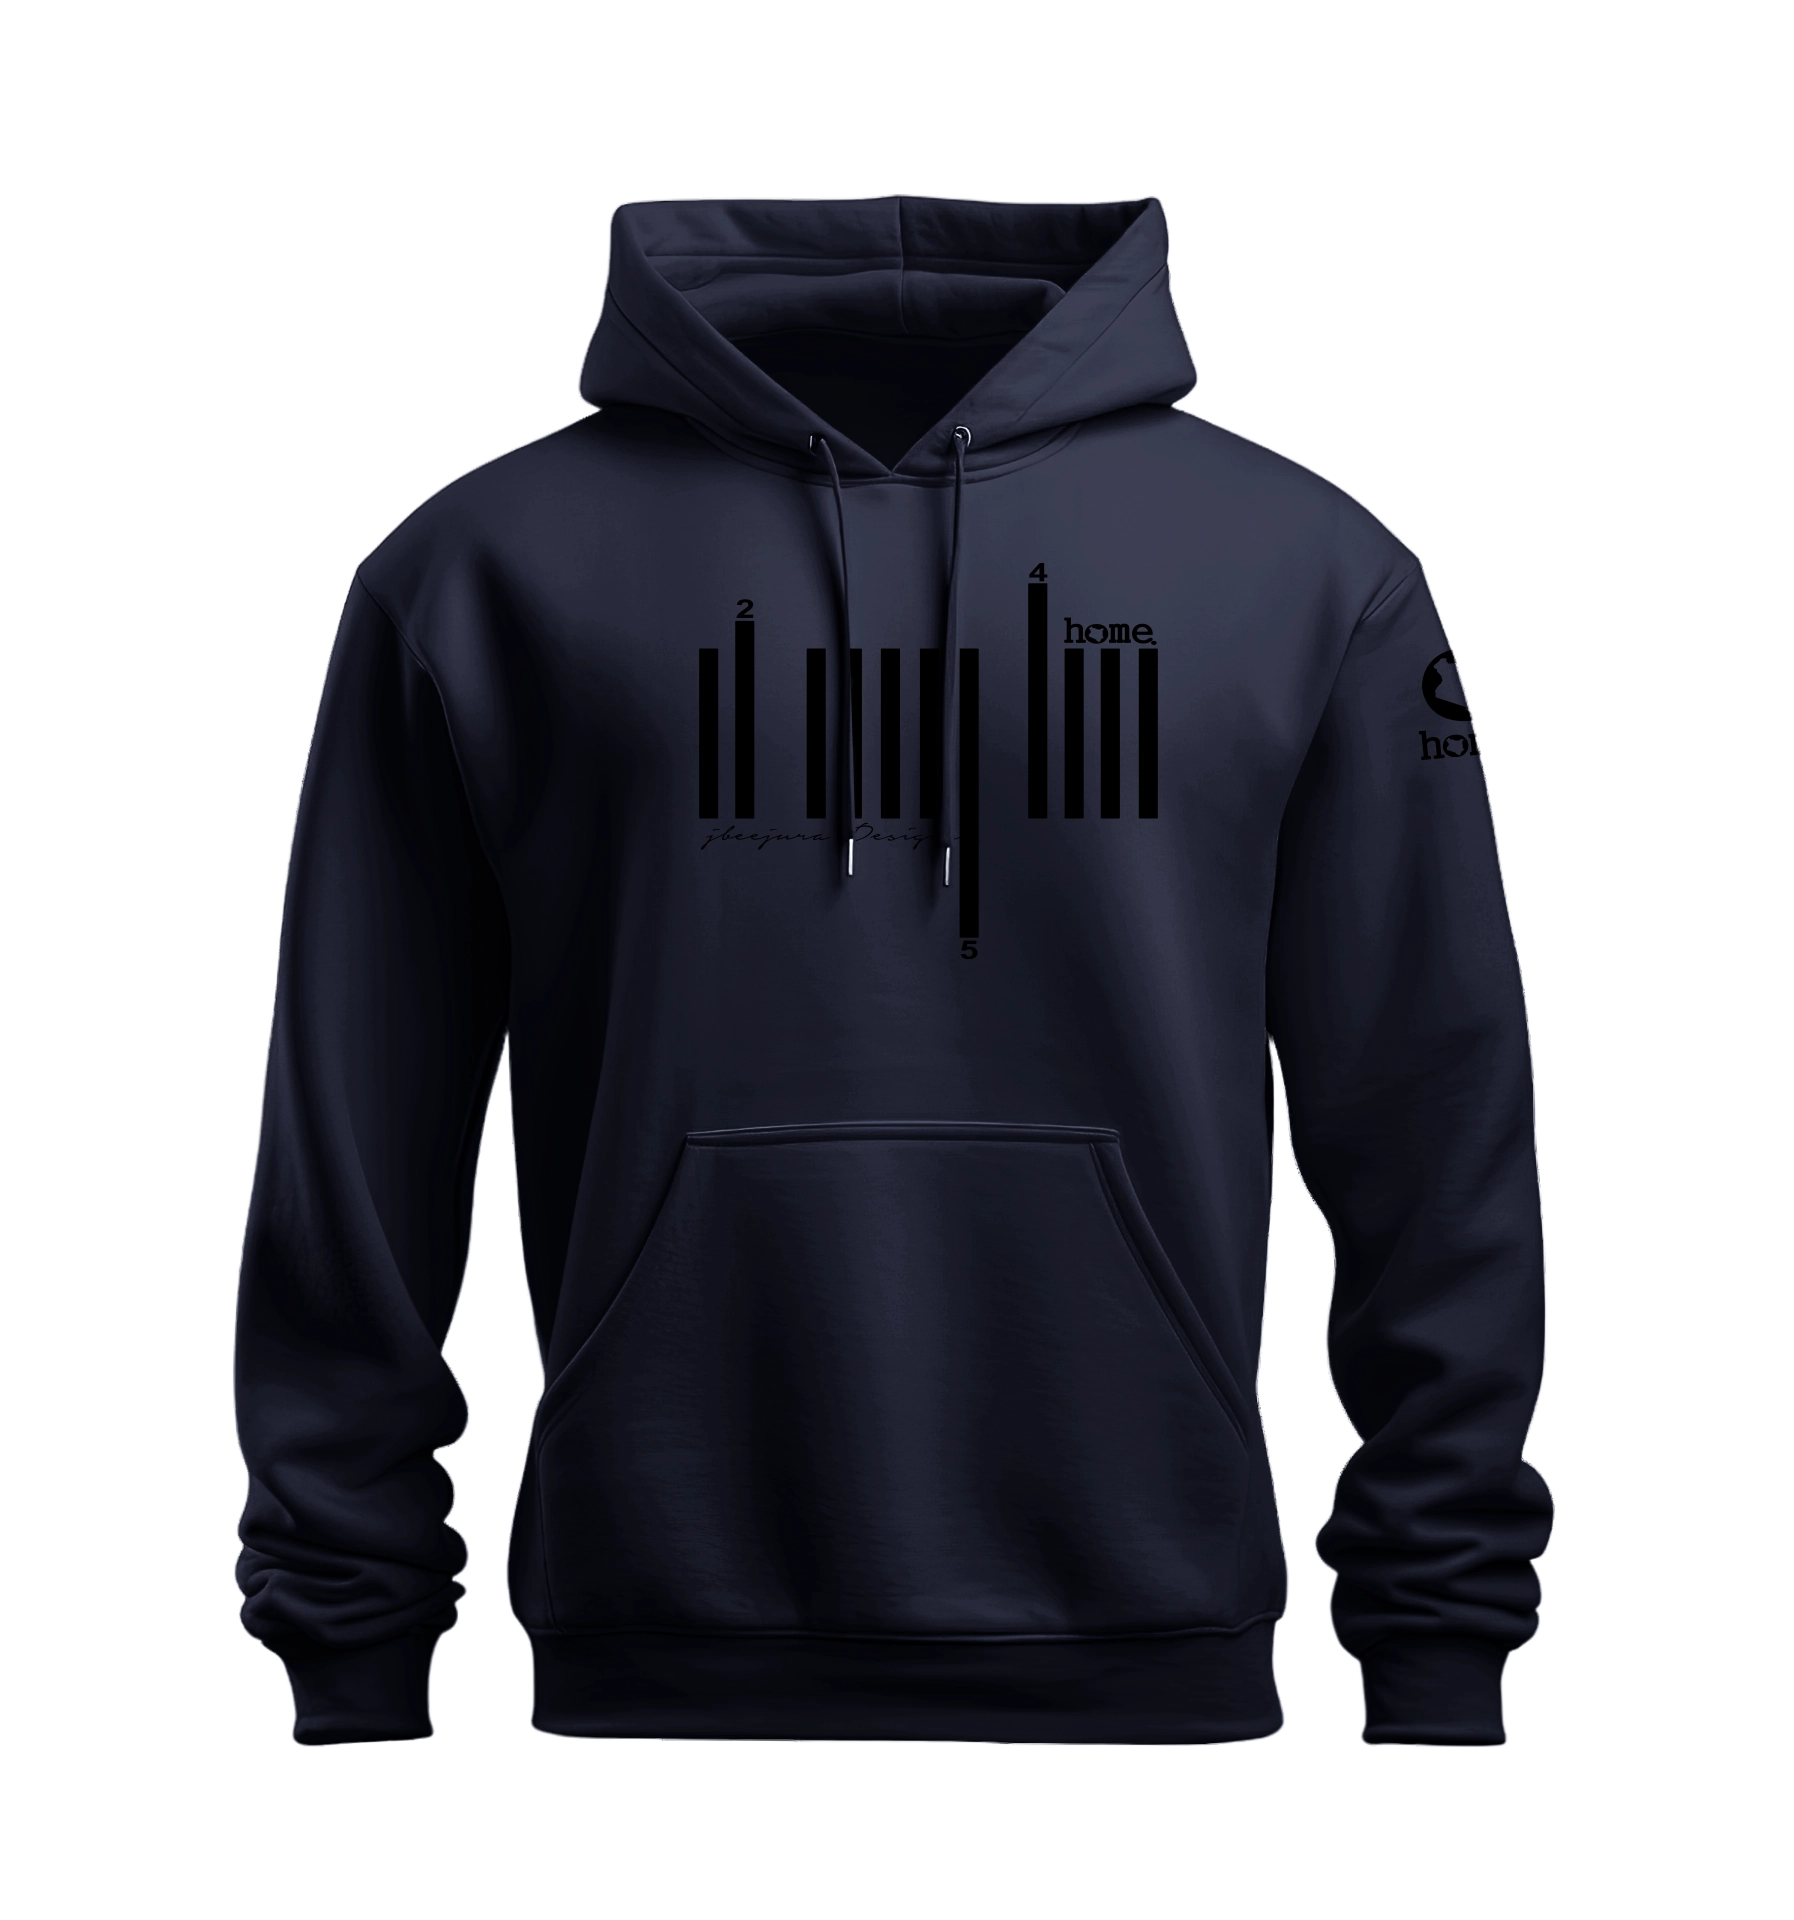 home_254 NUVETRA™ NAVY BLUE HOODIE WITH A BLACK BARS PRINT 